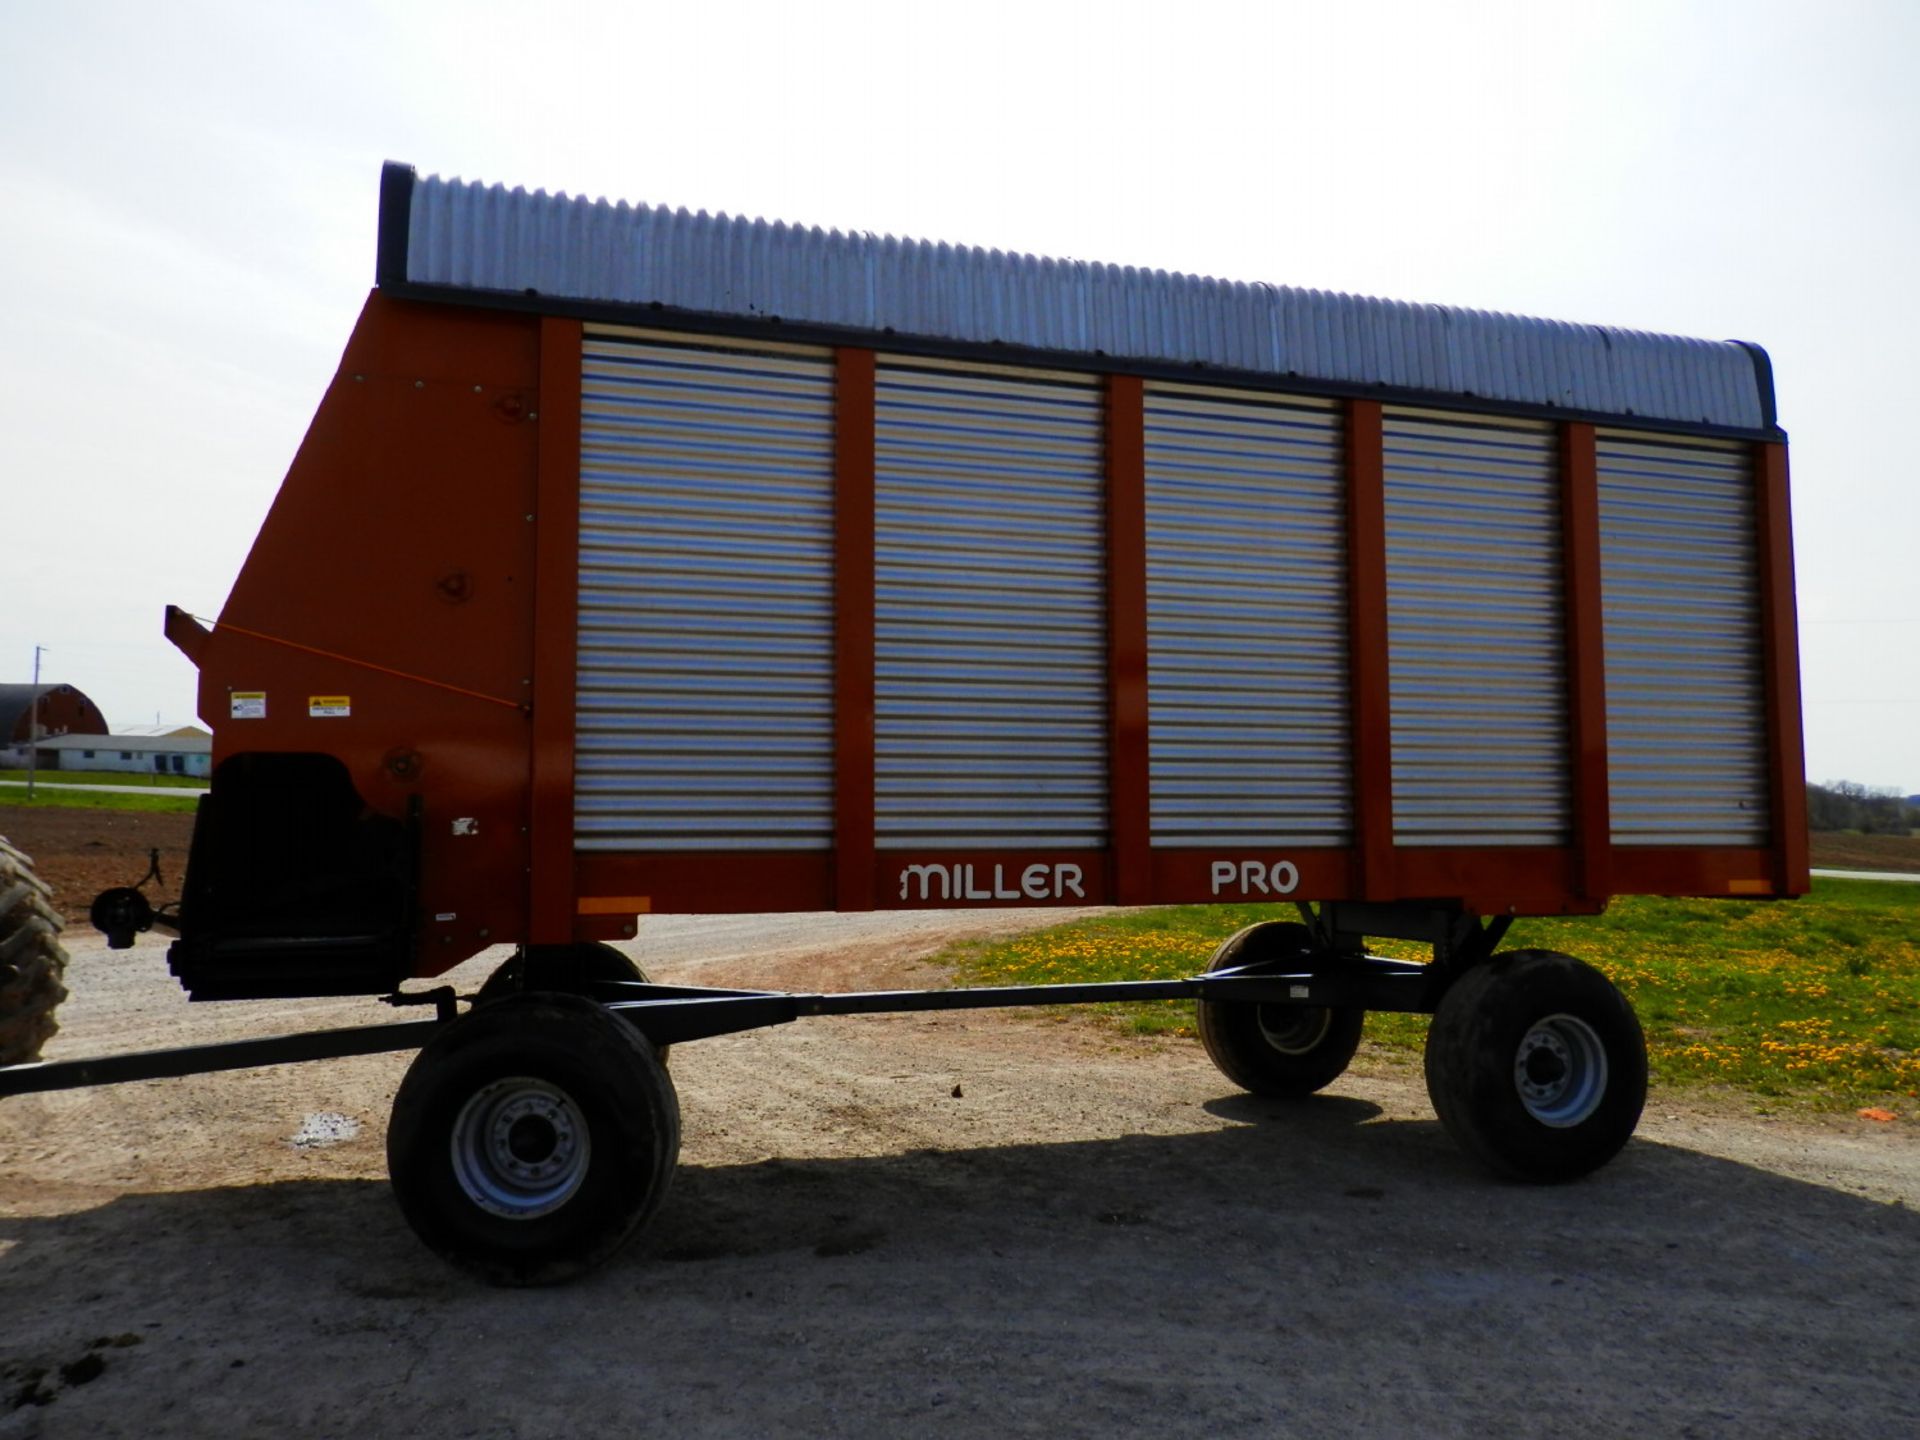 MILLER PRO 5300 18' LH FORAGE WAGON (Yellow Decal) - Image 2 of 7